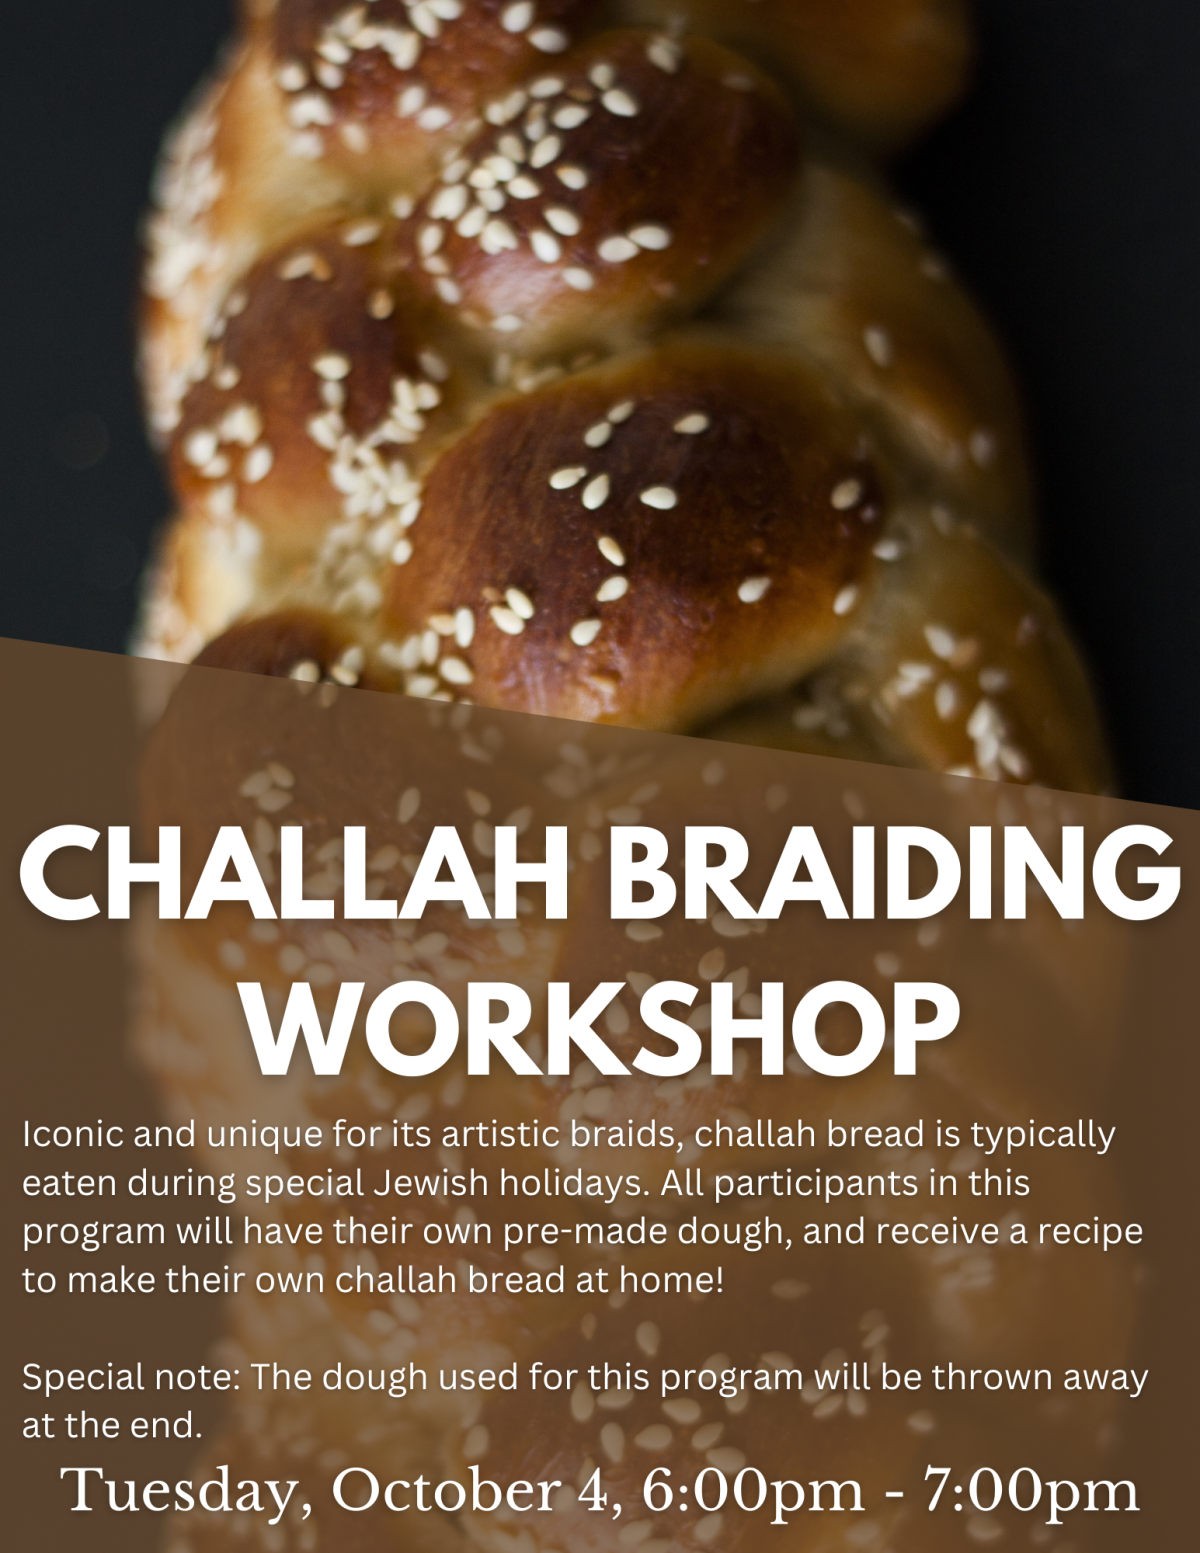 An image of a challah bread with text above with information about the program.